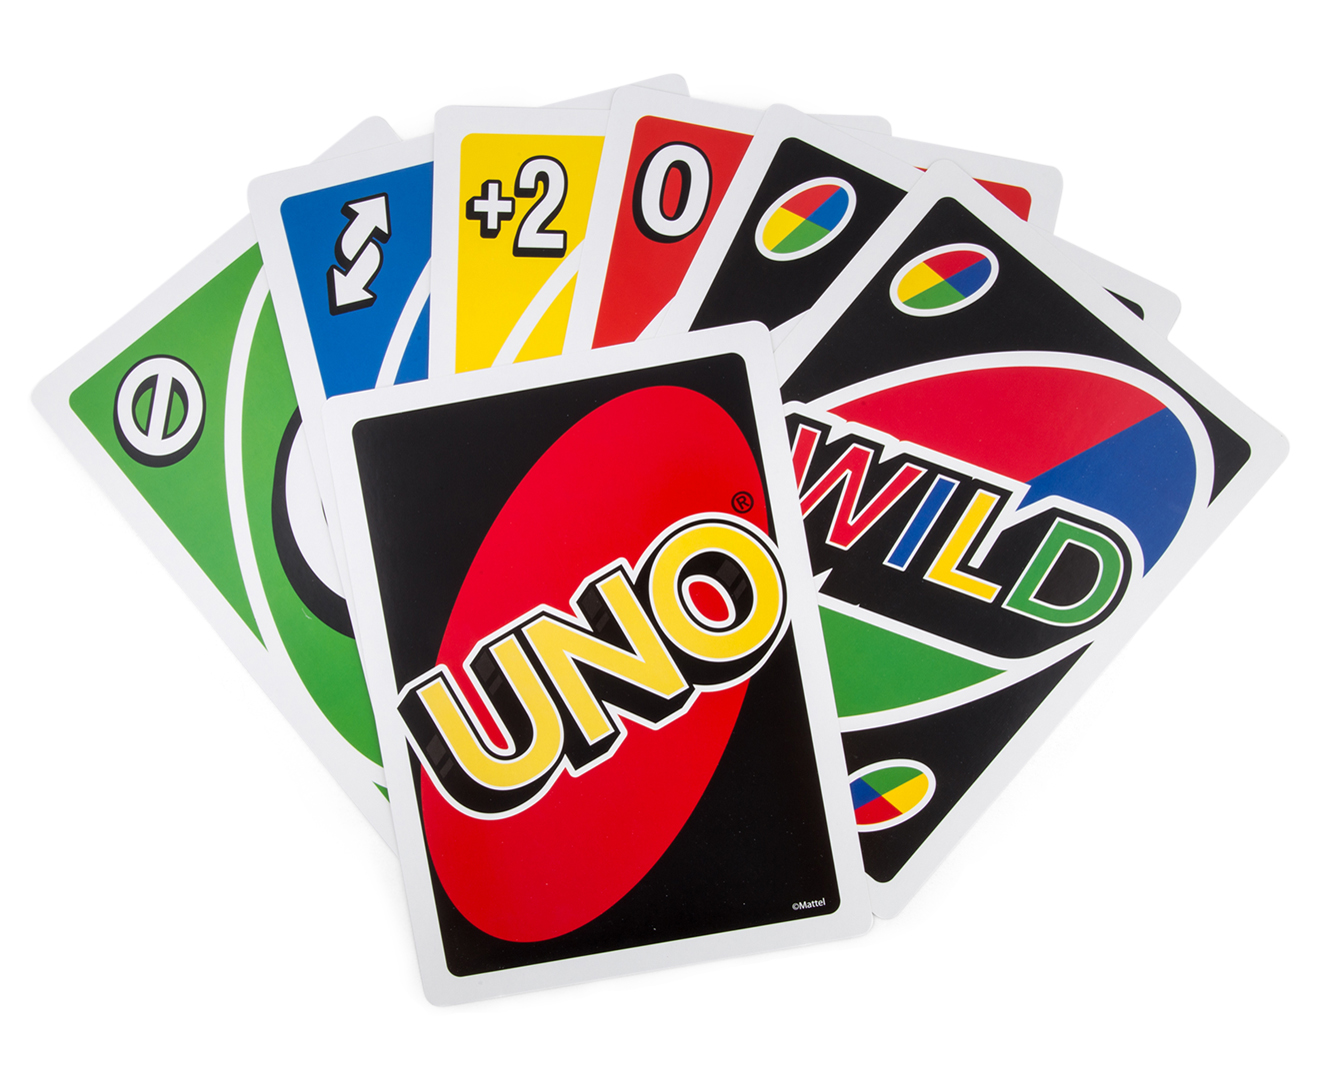 uno card game popularity